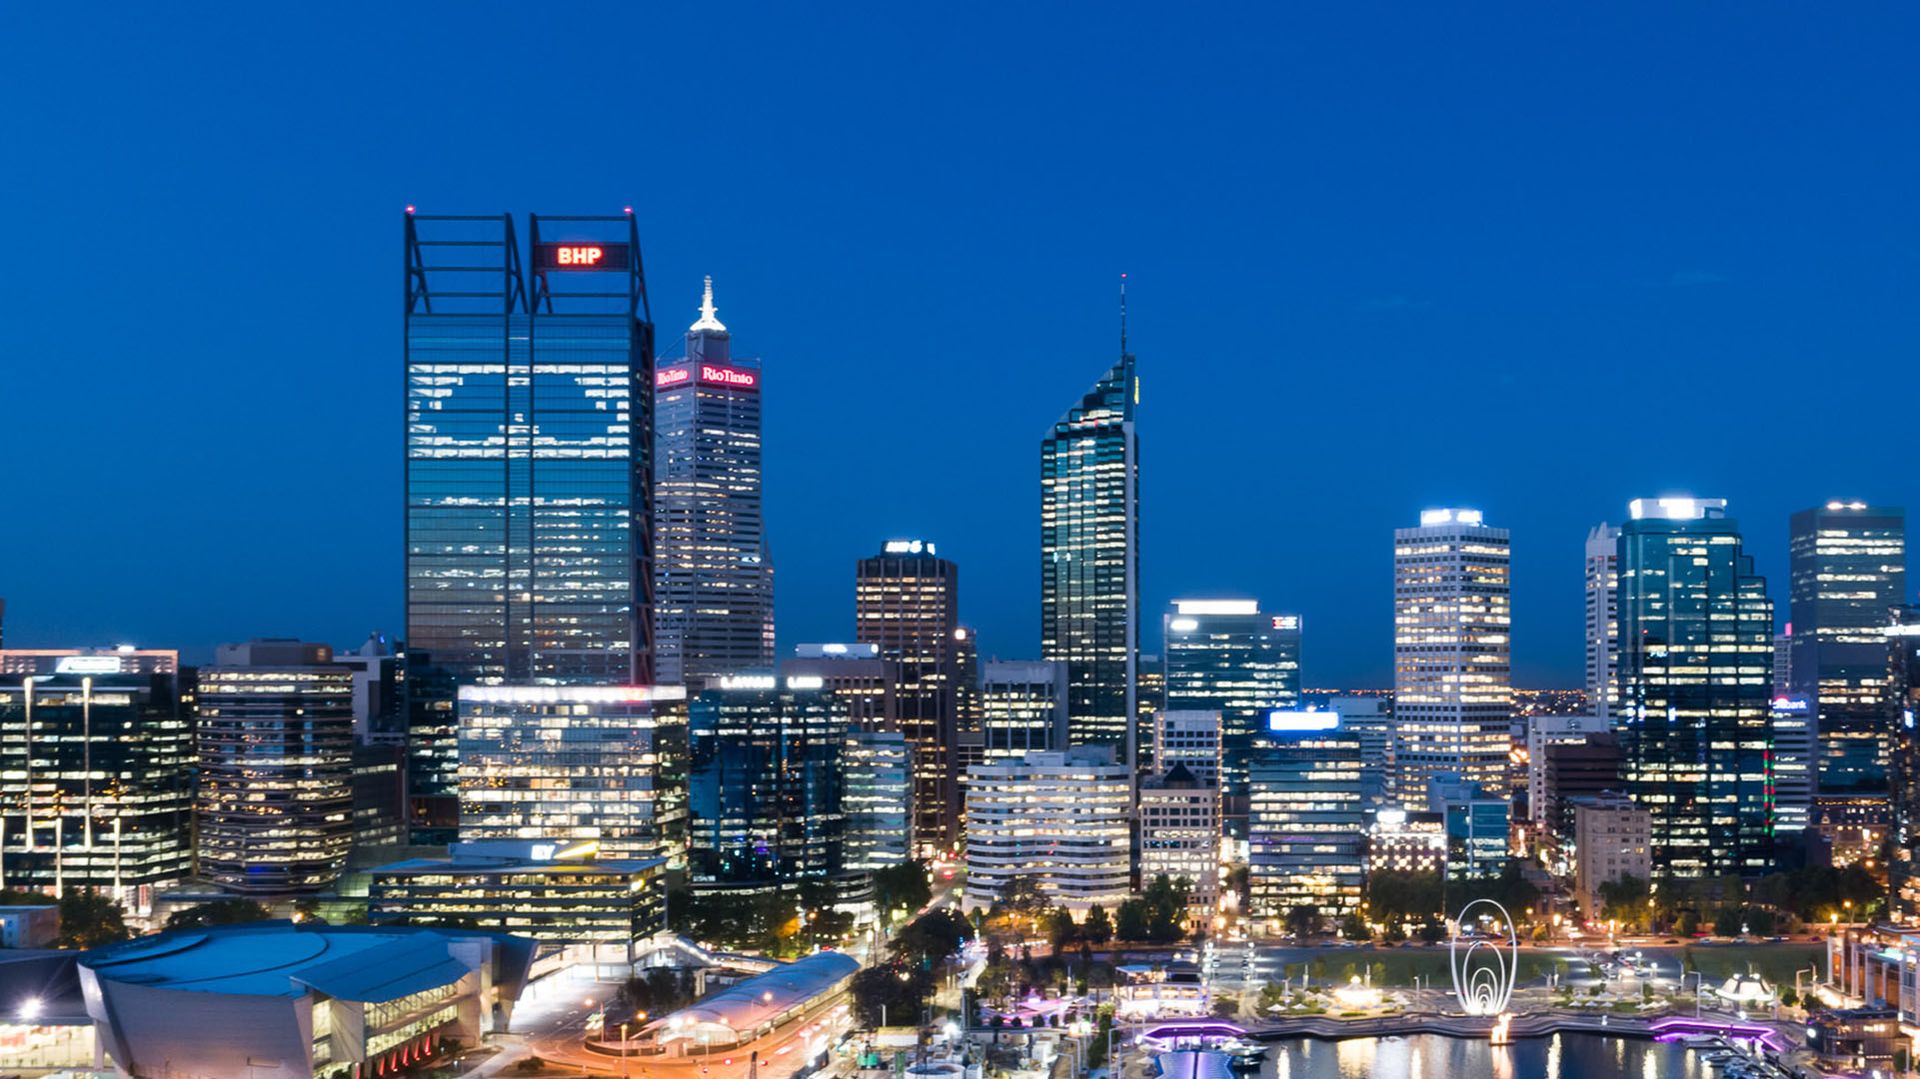 Night-time view of the Perth CBD skyline. The Movember logo is visible in the BHP building.